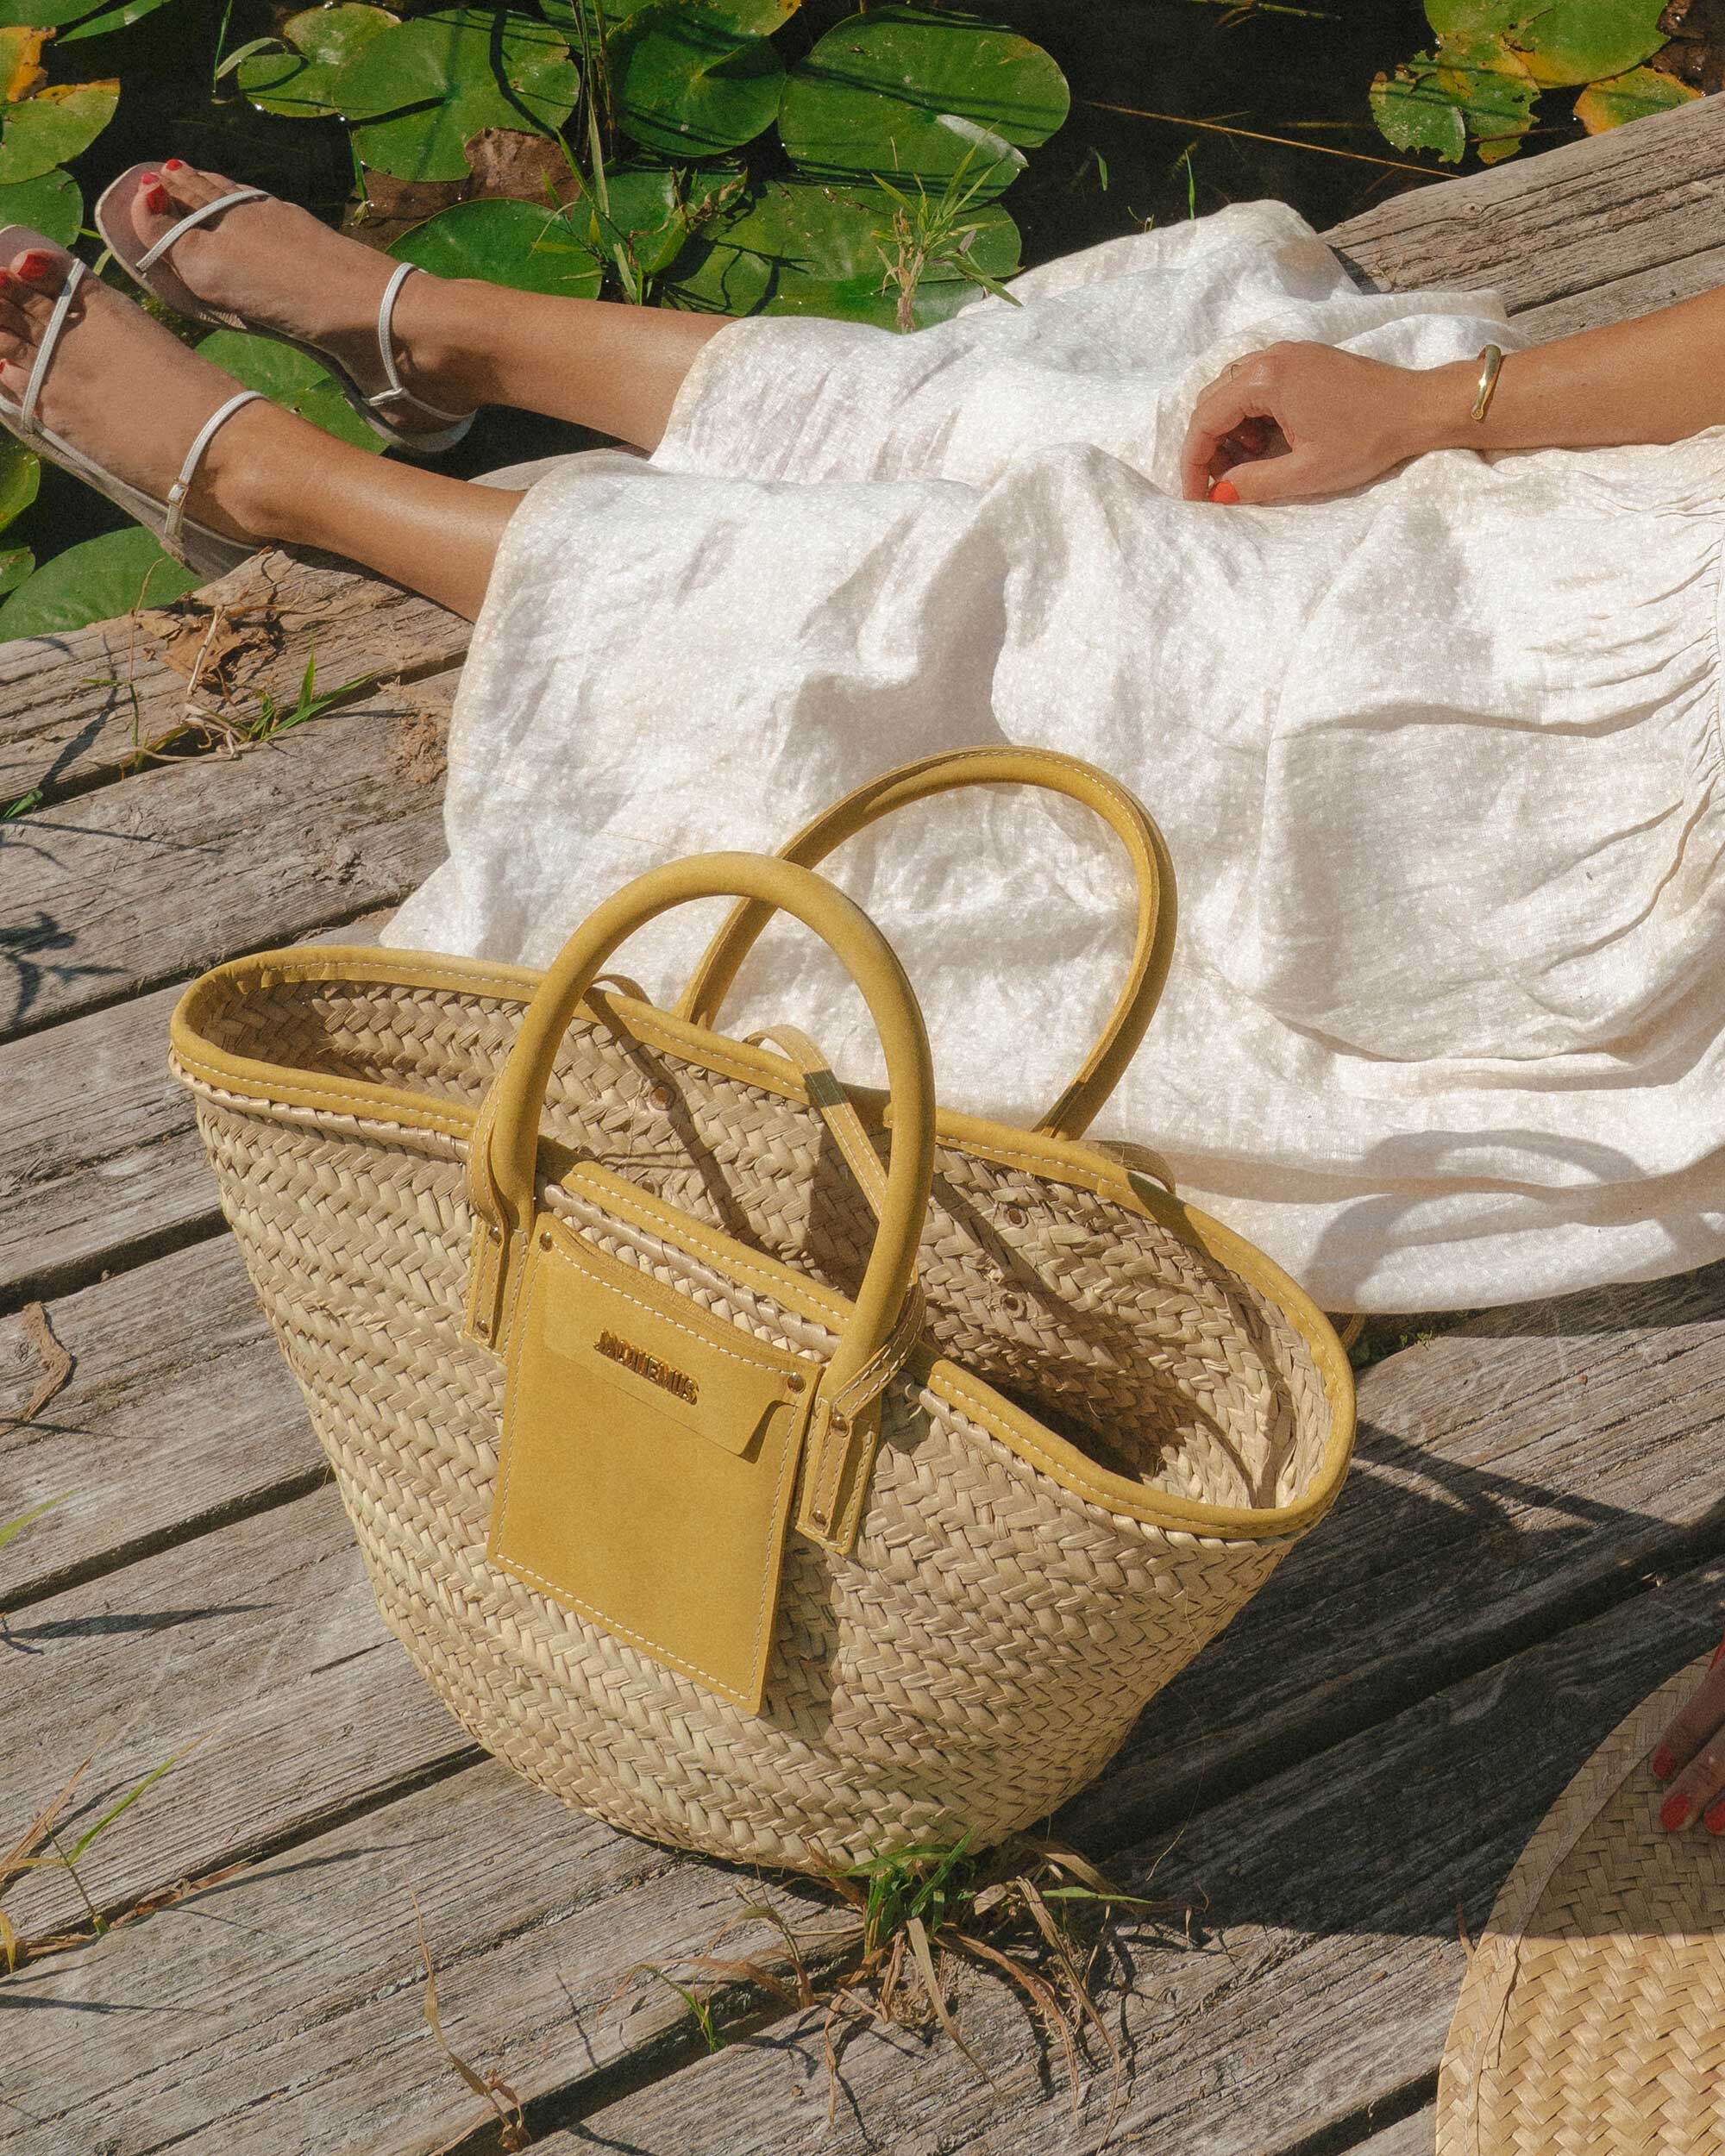 Dresses for Warm Weather. Sarah Butler of @sarahchristine wearing Zulu & Zephyr lightweight linen relaxed casual fit dress and Jacquemus straw tote bag Le panier Soleil woven straw tote bag in Seattle, Washington -6.jpg